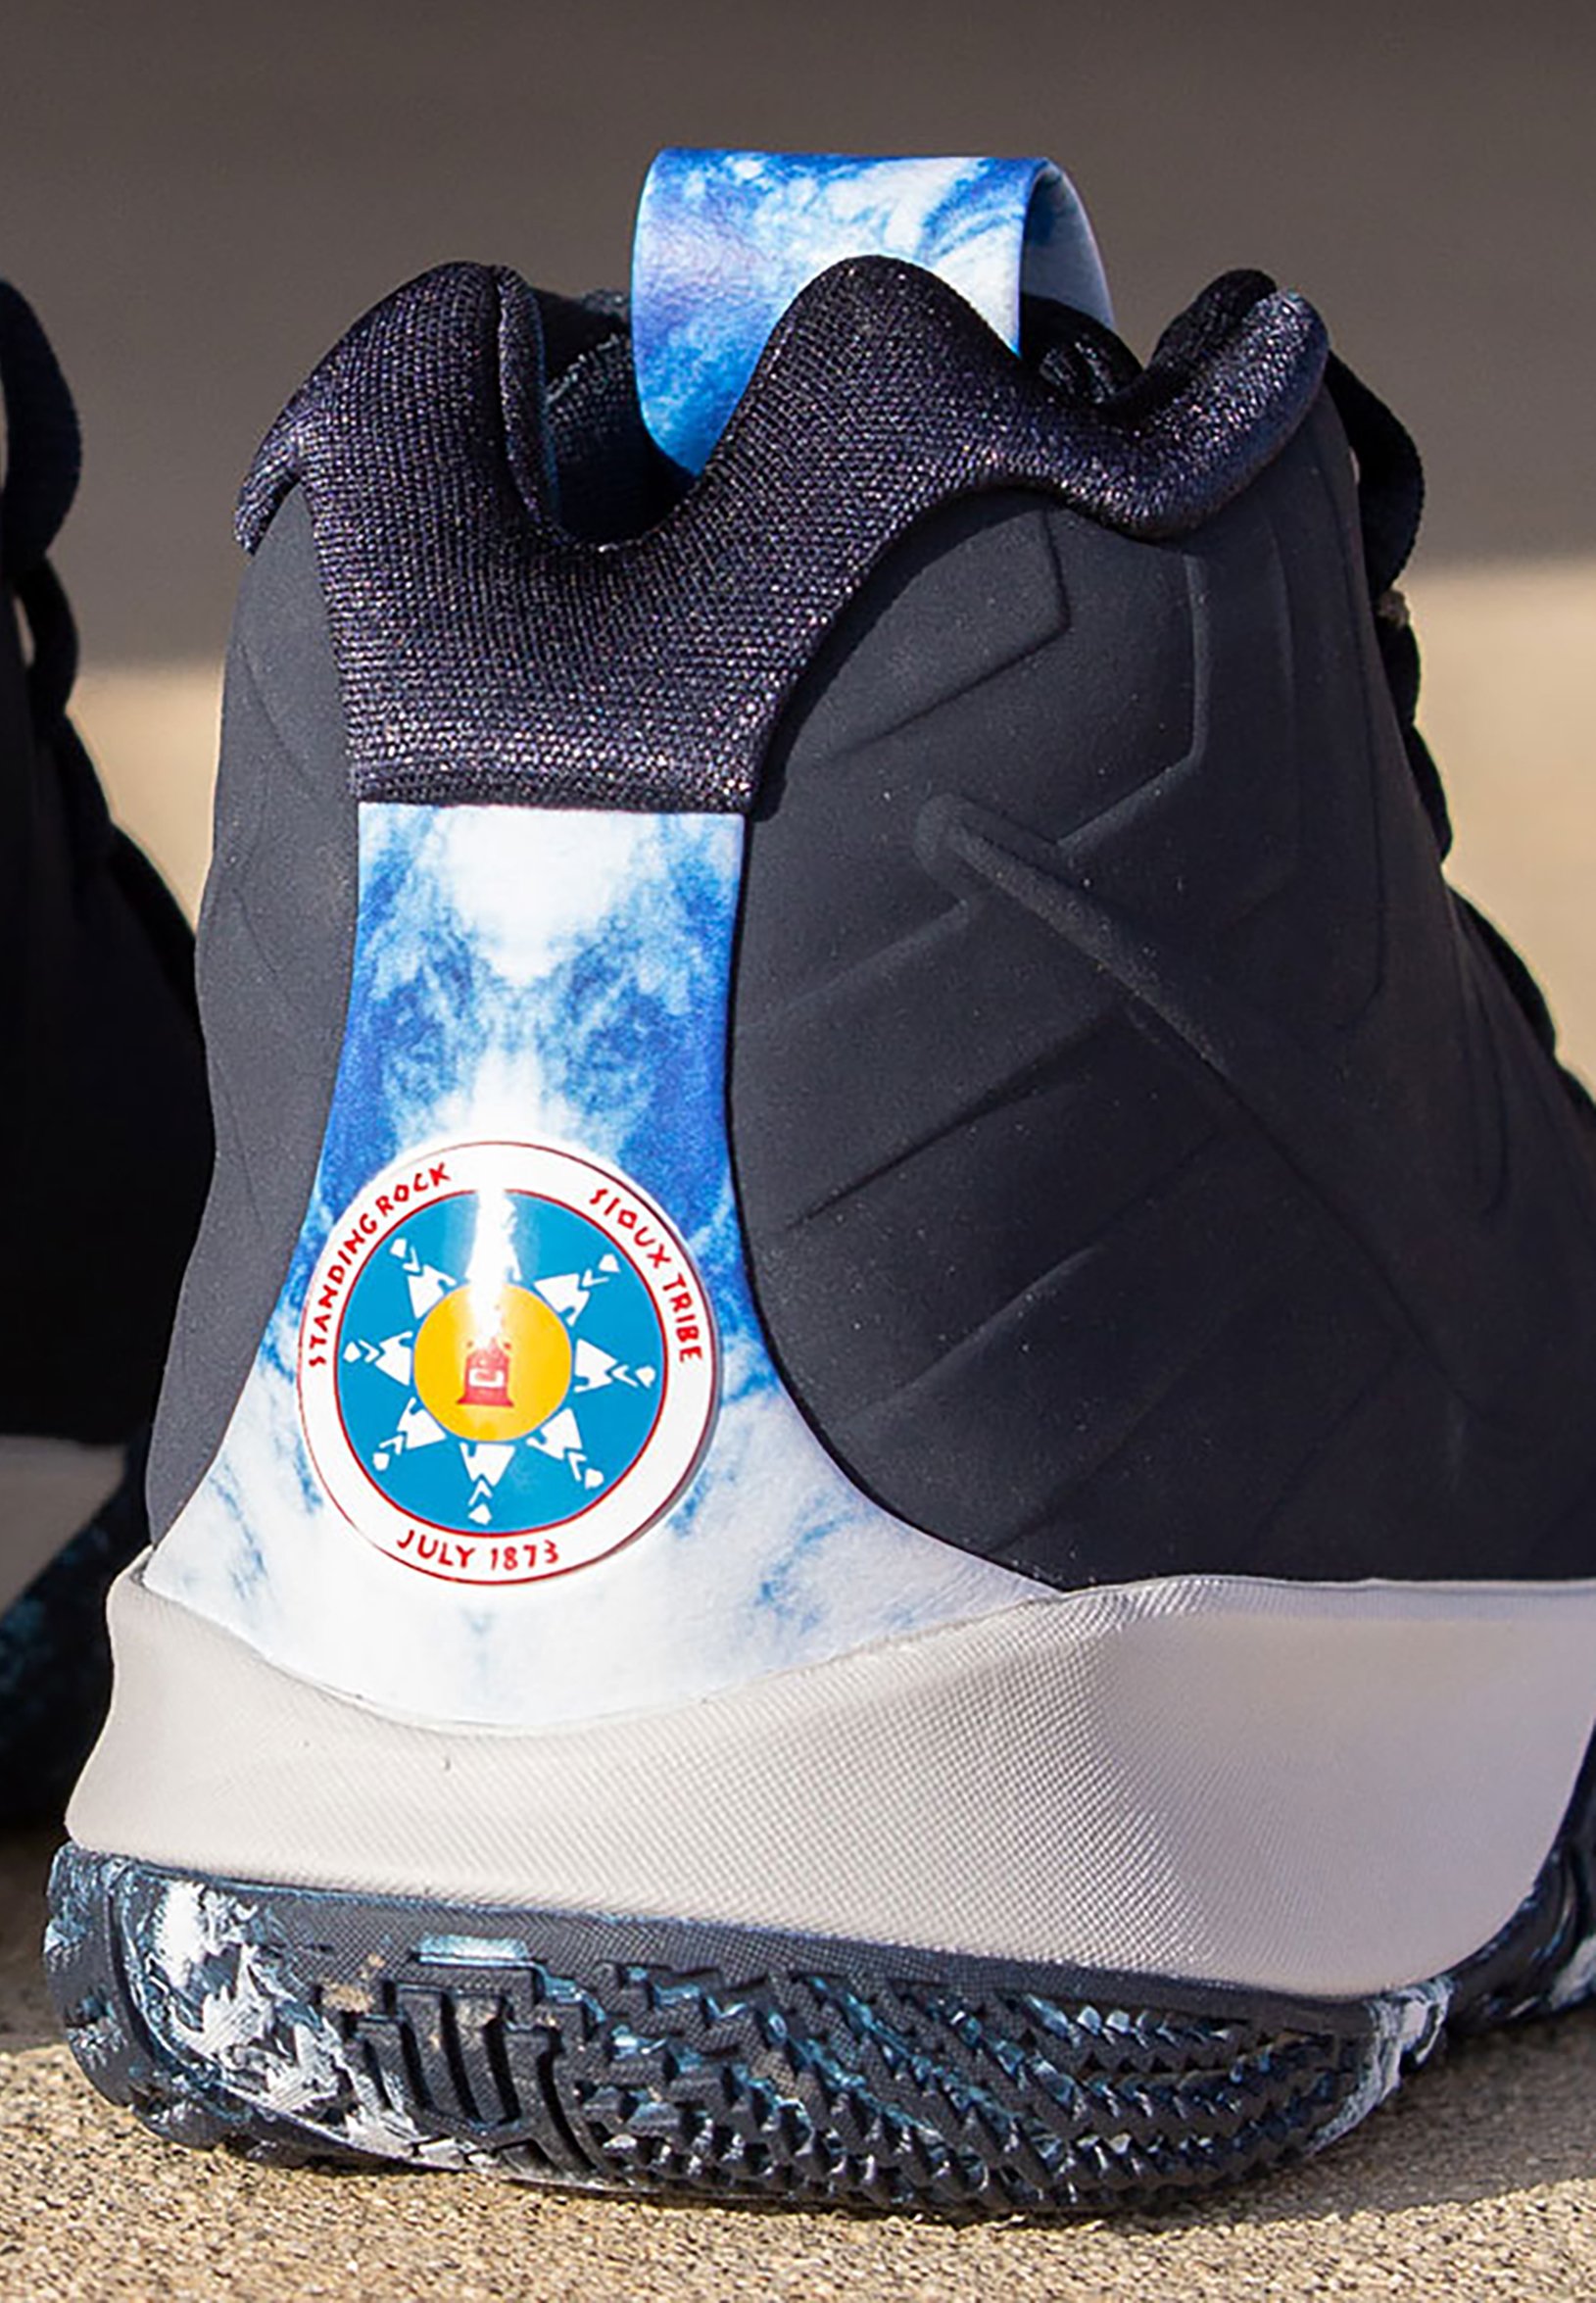 standing rock kyrie shoes